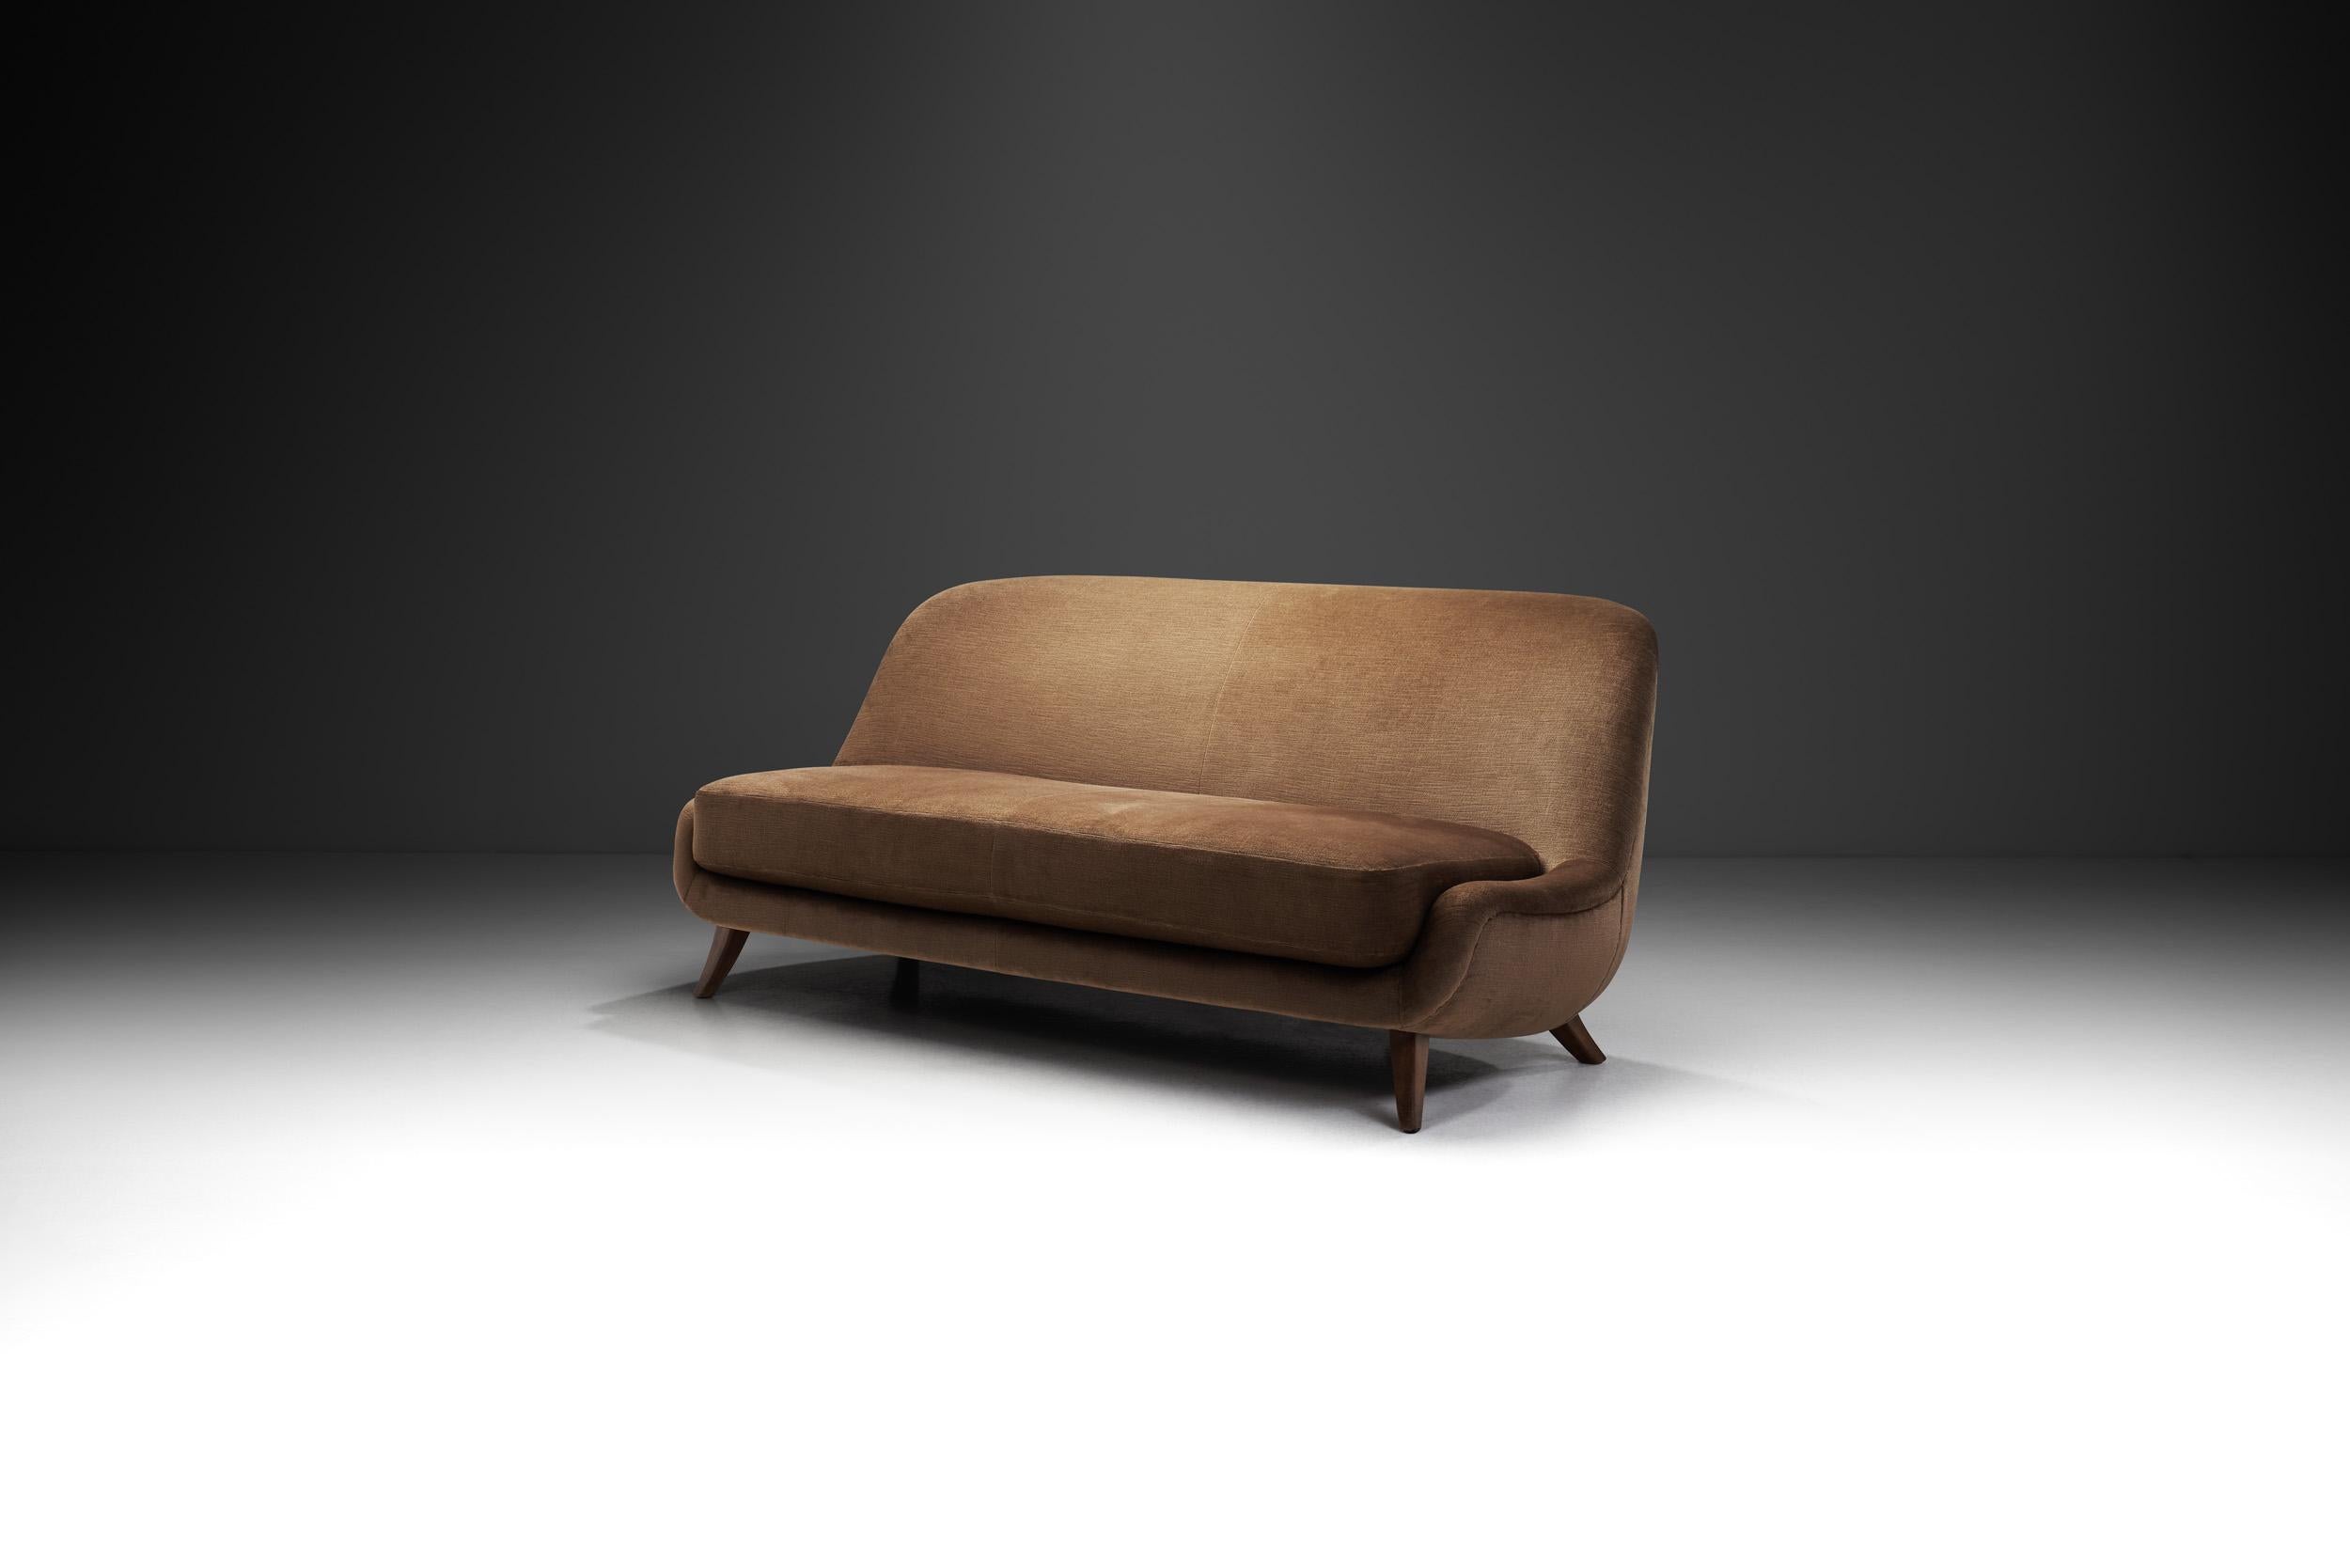 The designer of this sofa evidently attached great and equal importance to form and function. With an open design profile, this two-seater sofa carries with it some of the fundamental characteristics and ideals of mid-century